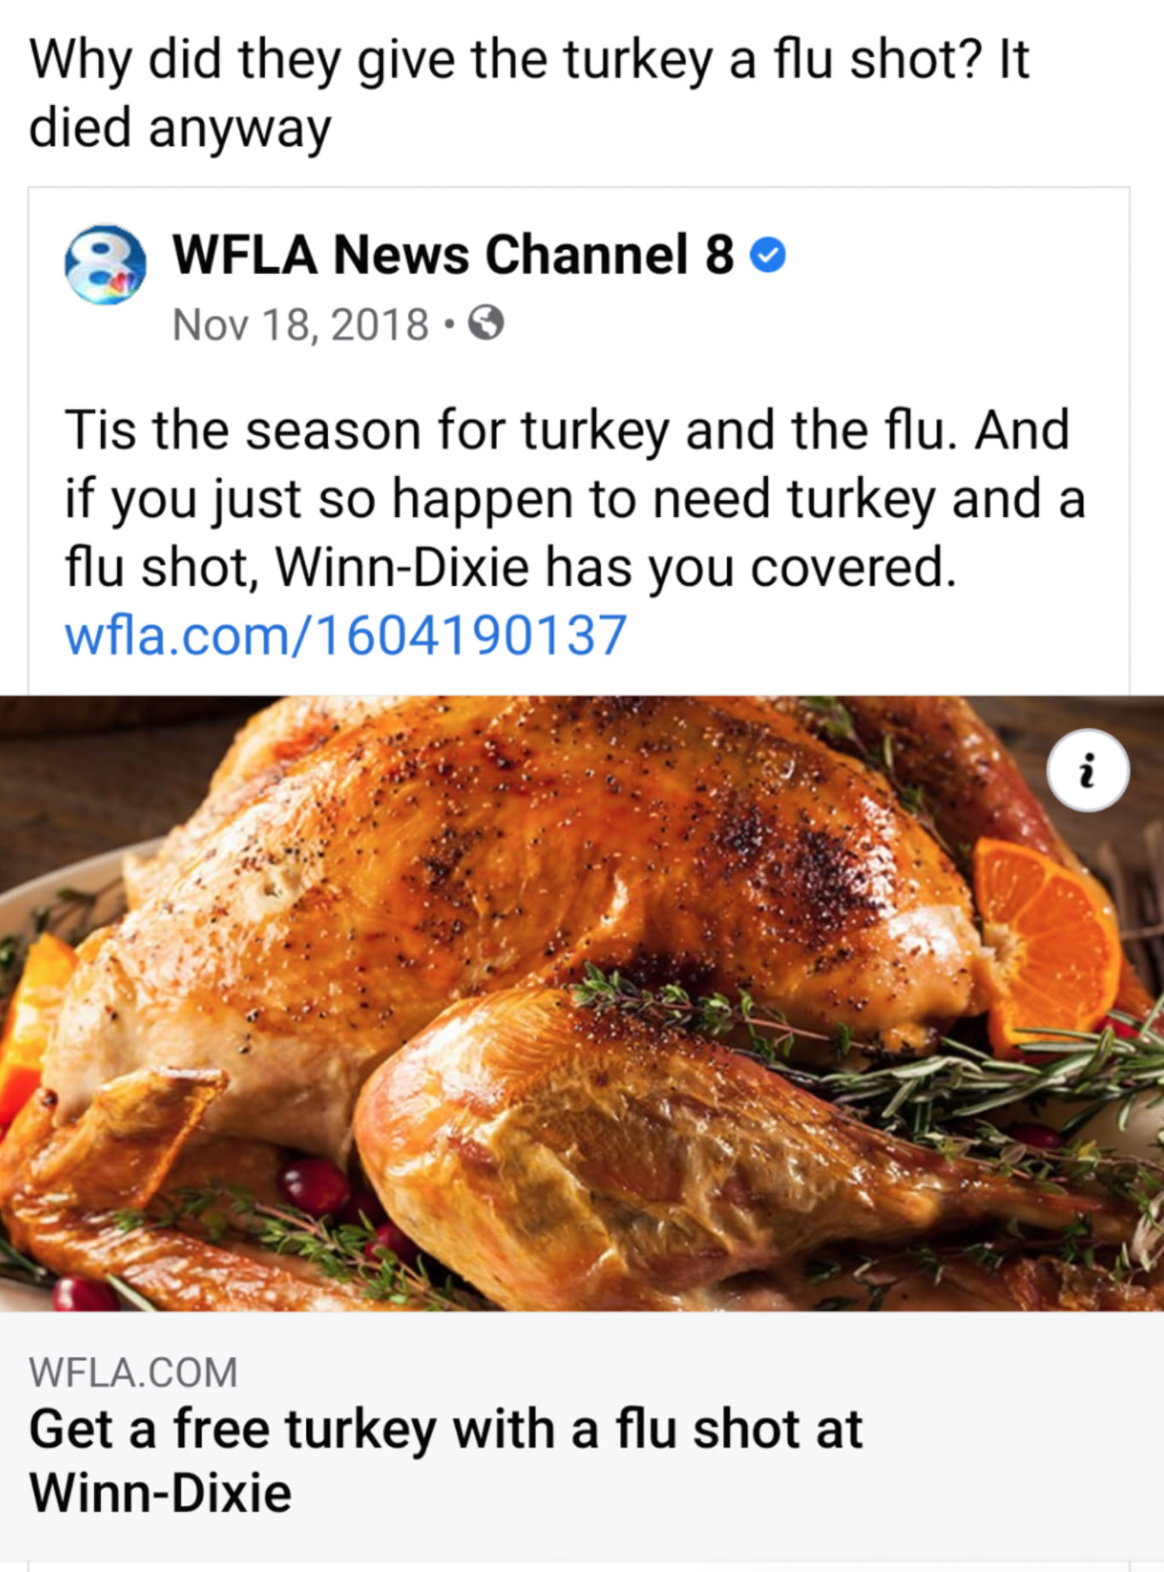 turkey delicious - Why did they give the turkey a flu shot? It died anyway Wfla News Channel . Tis the season for turkey and the flu. And if you just so happen to need turkey and a flu shot, WinnDixie has you covered. wfla.com1604190137 Wfla.Com Get a fre